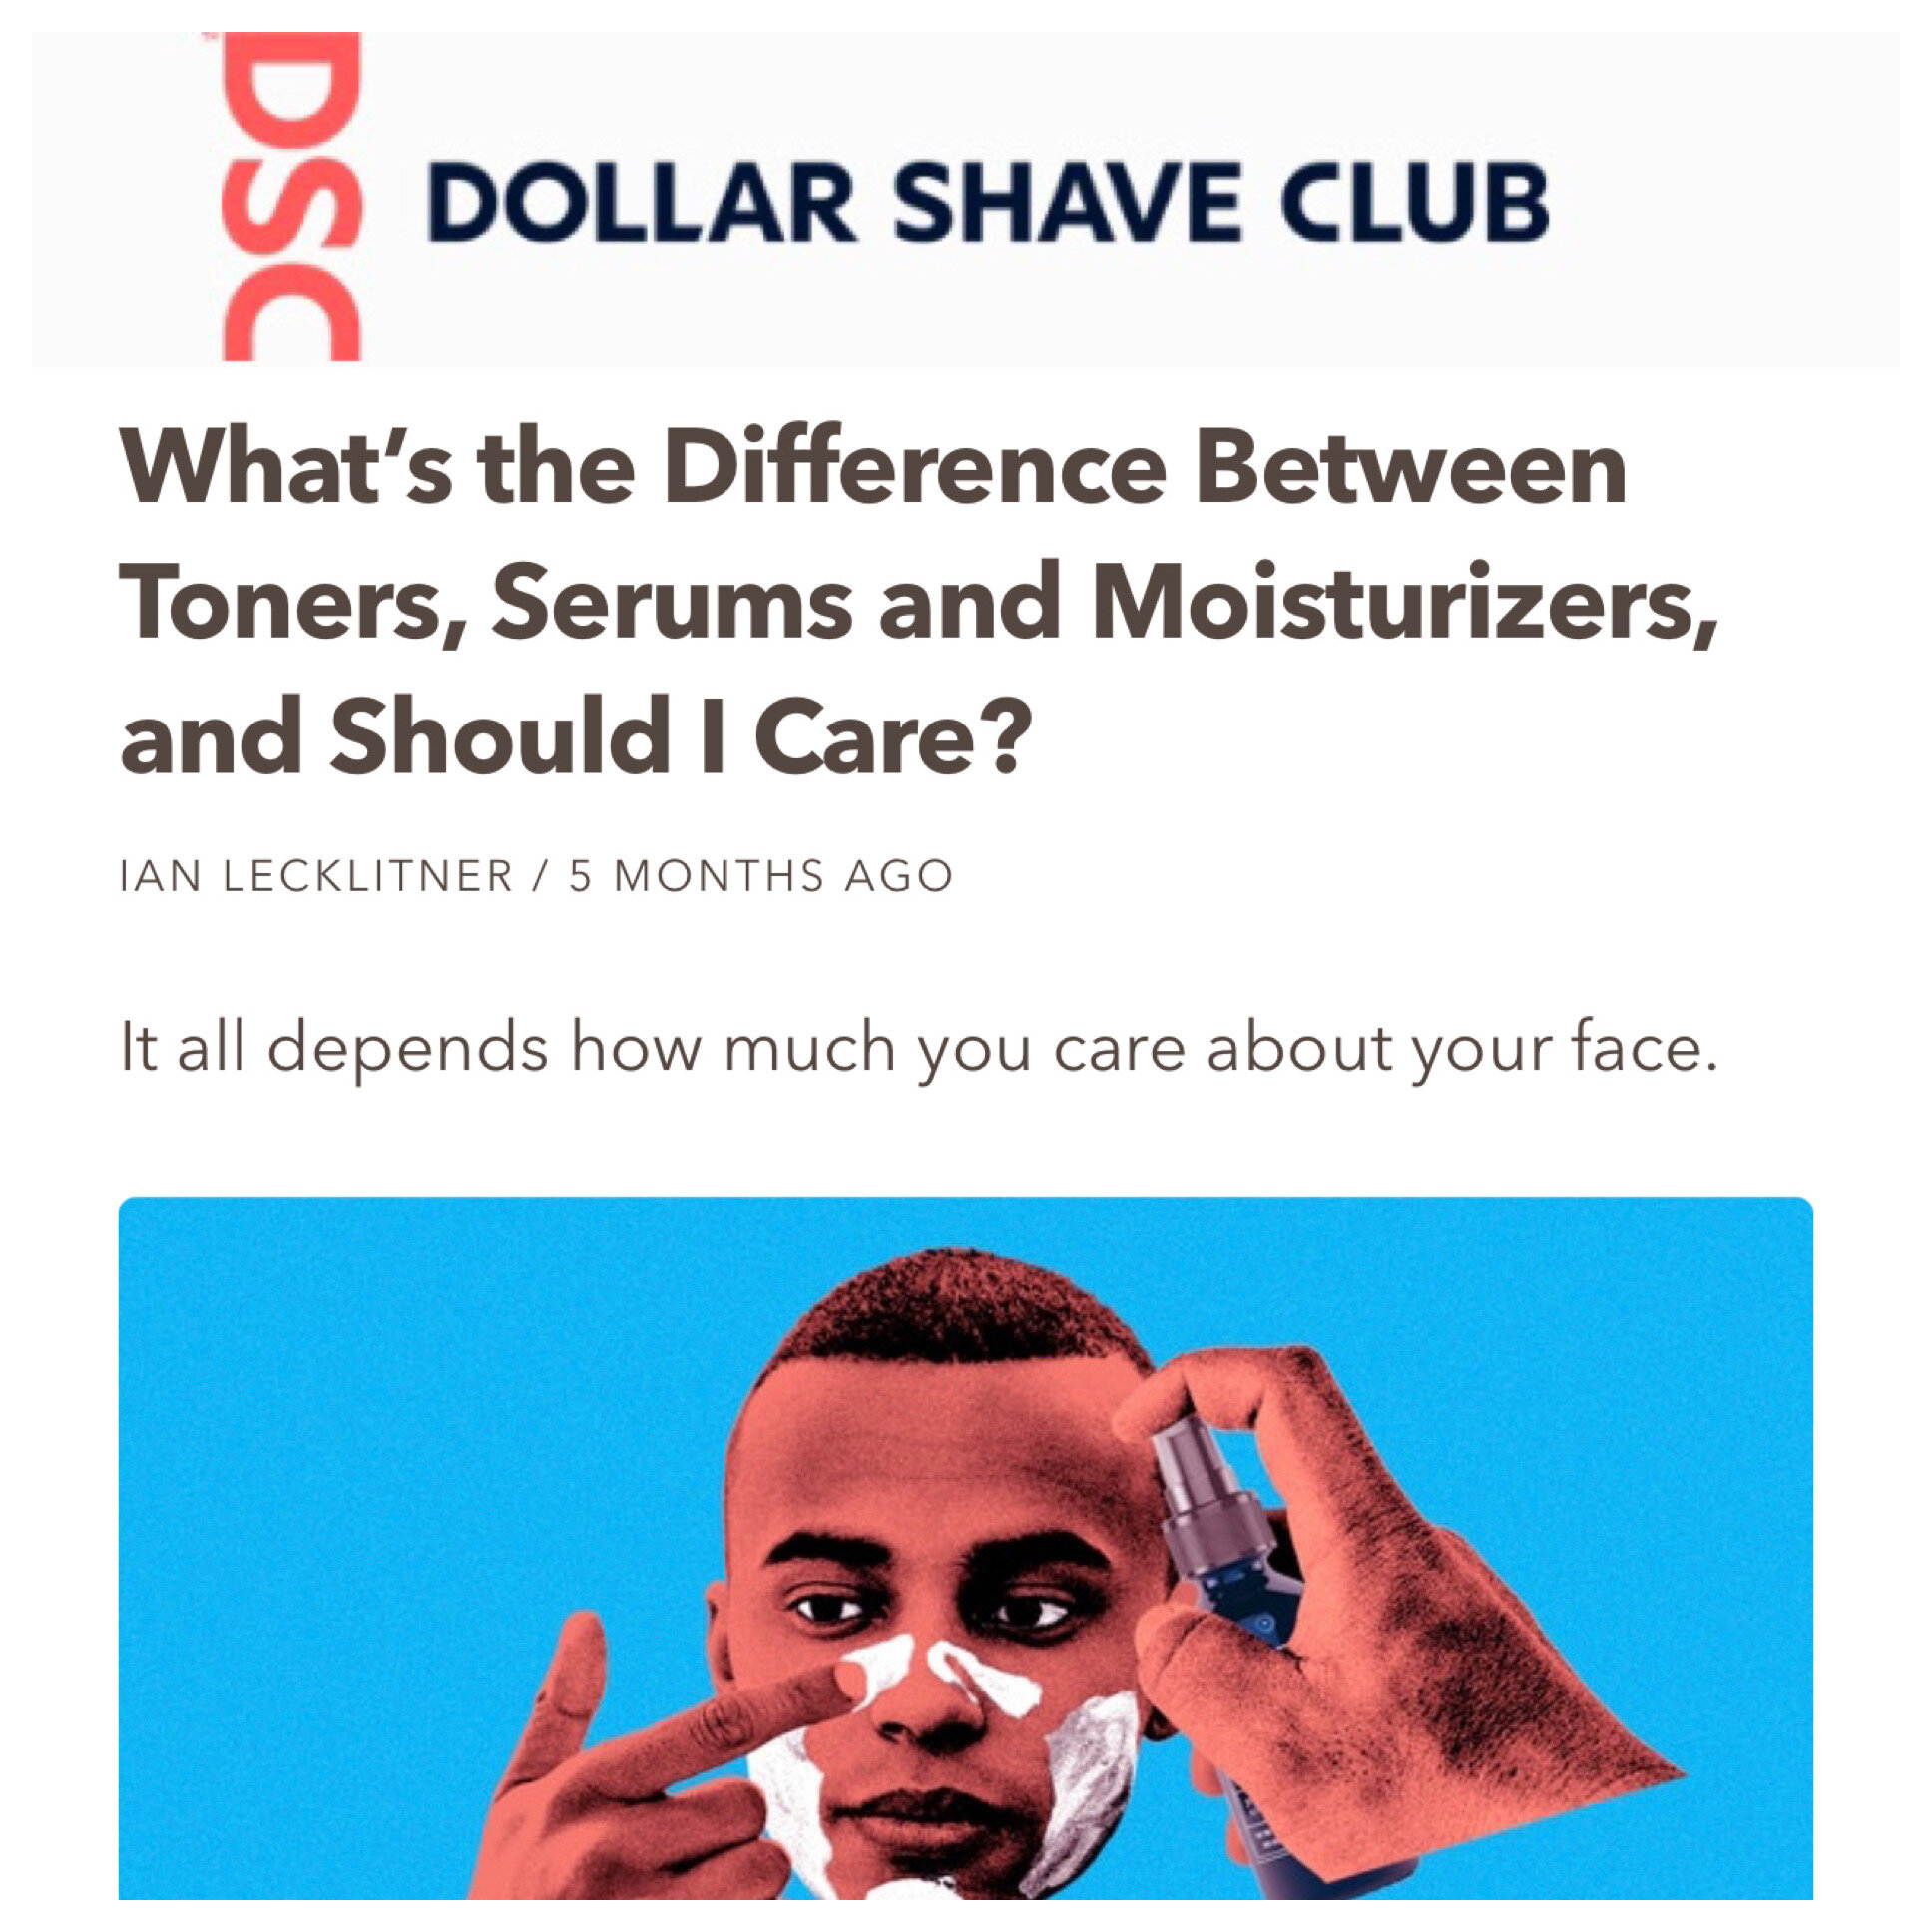 Dollar Shave Club Blog featuring Gregory Dylan